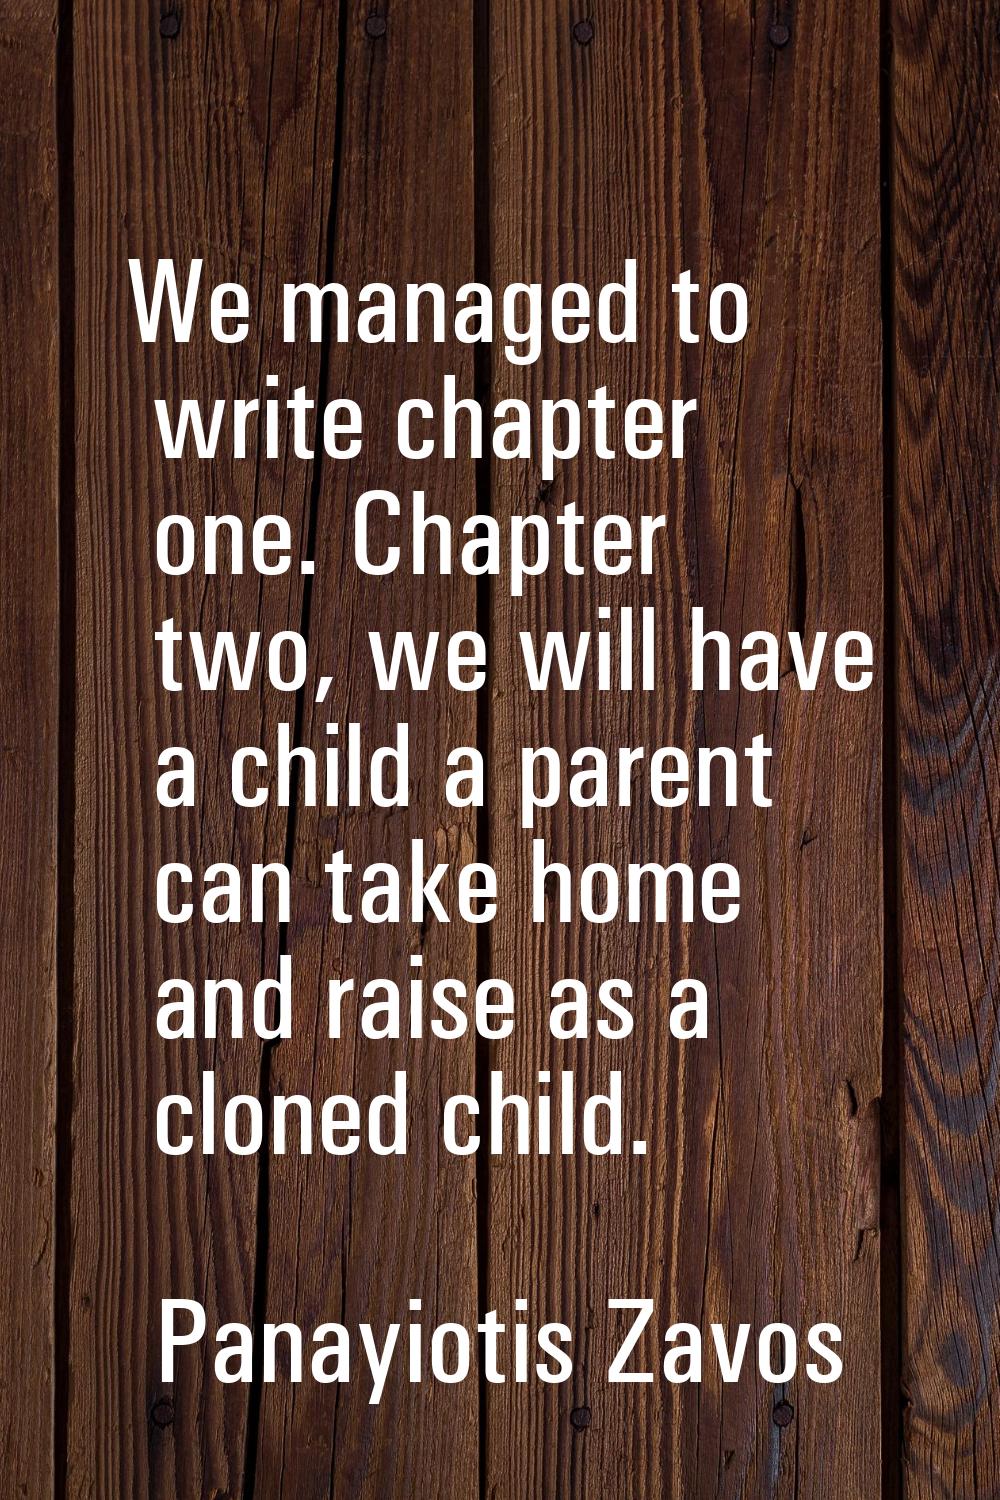 We managed to write chapter one. Chapter two, we will have a child a parent can take home and raise